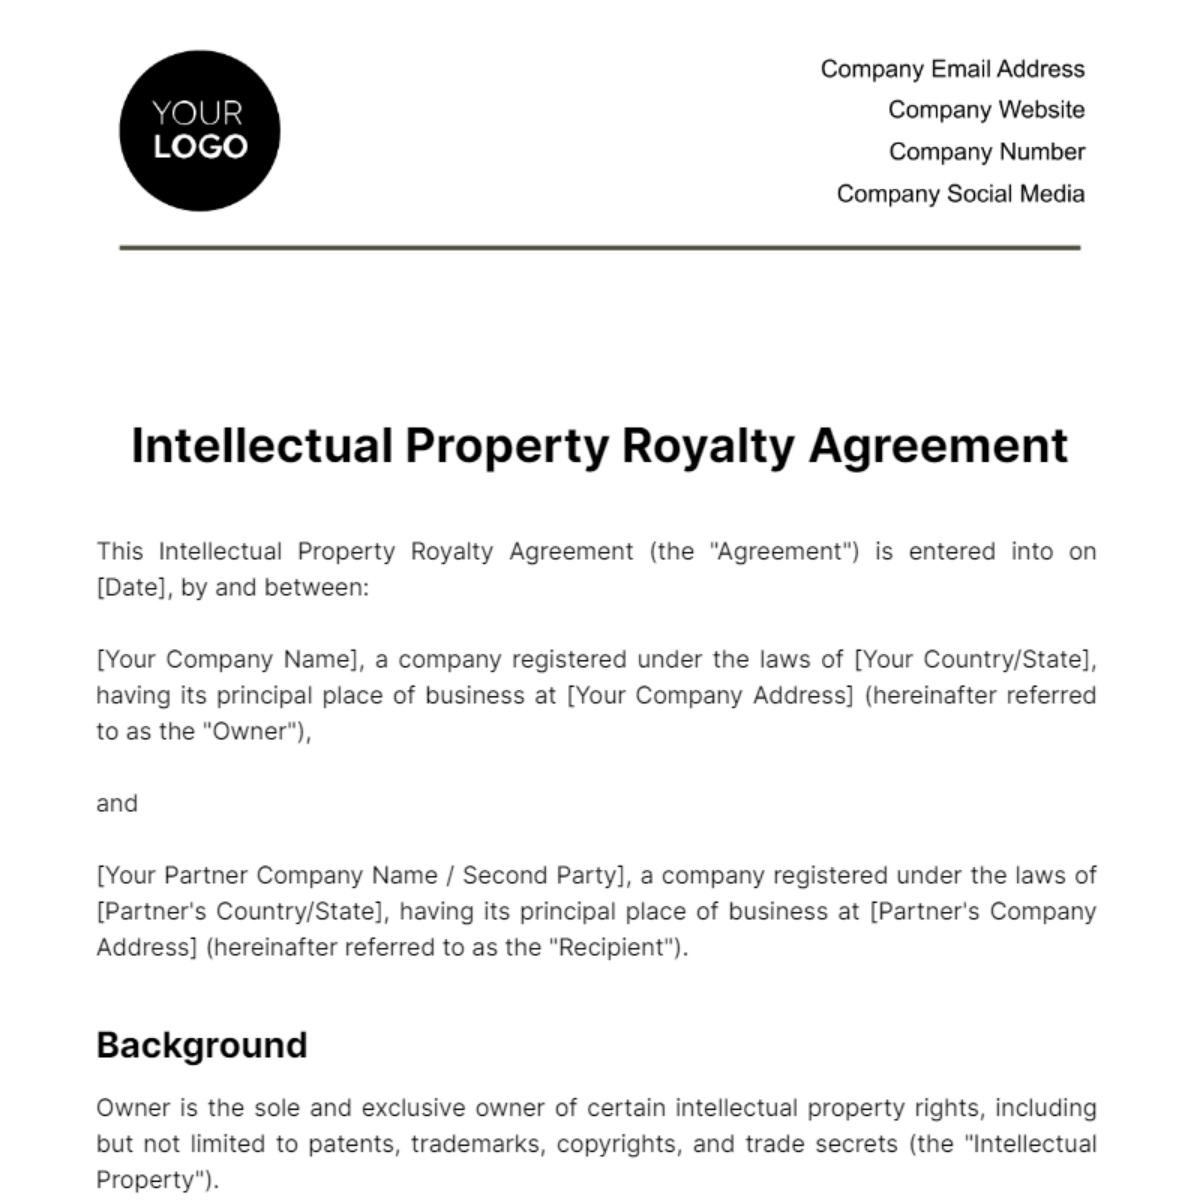 Legal Intellectual Property Royalty Agreement Template